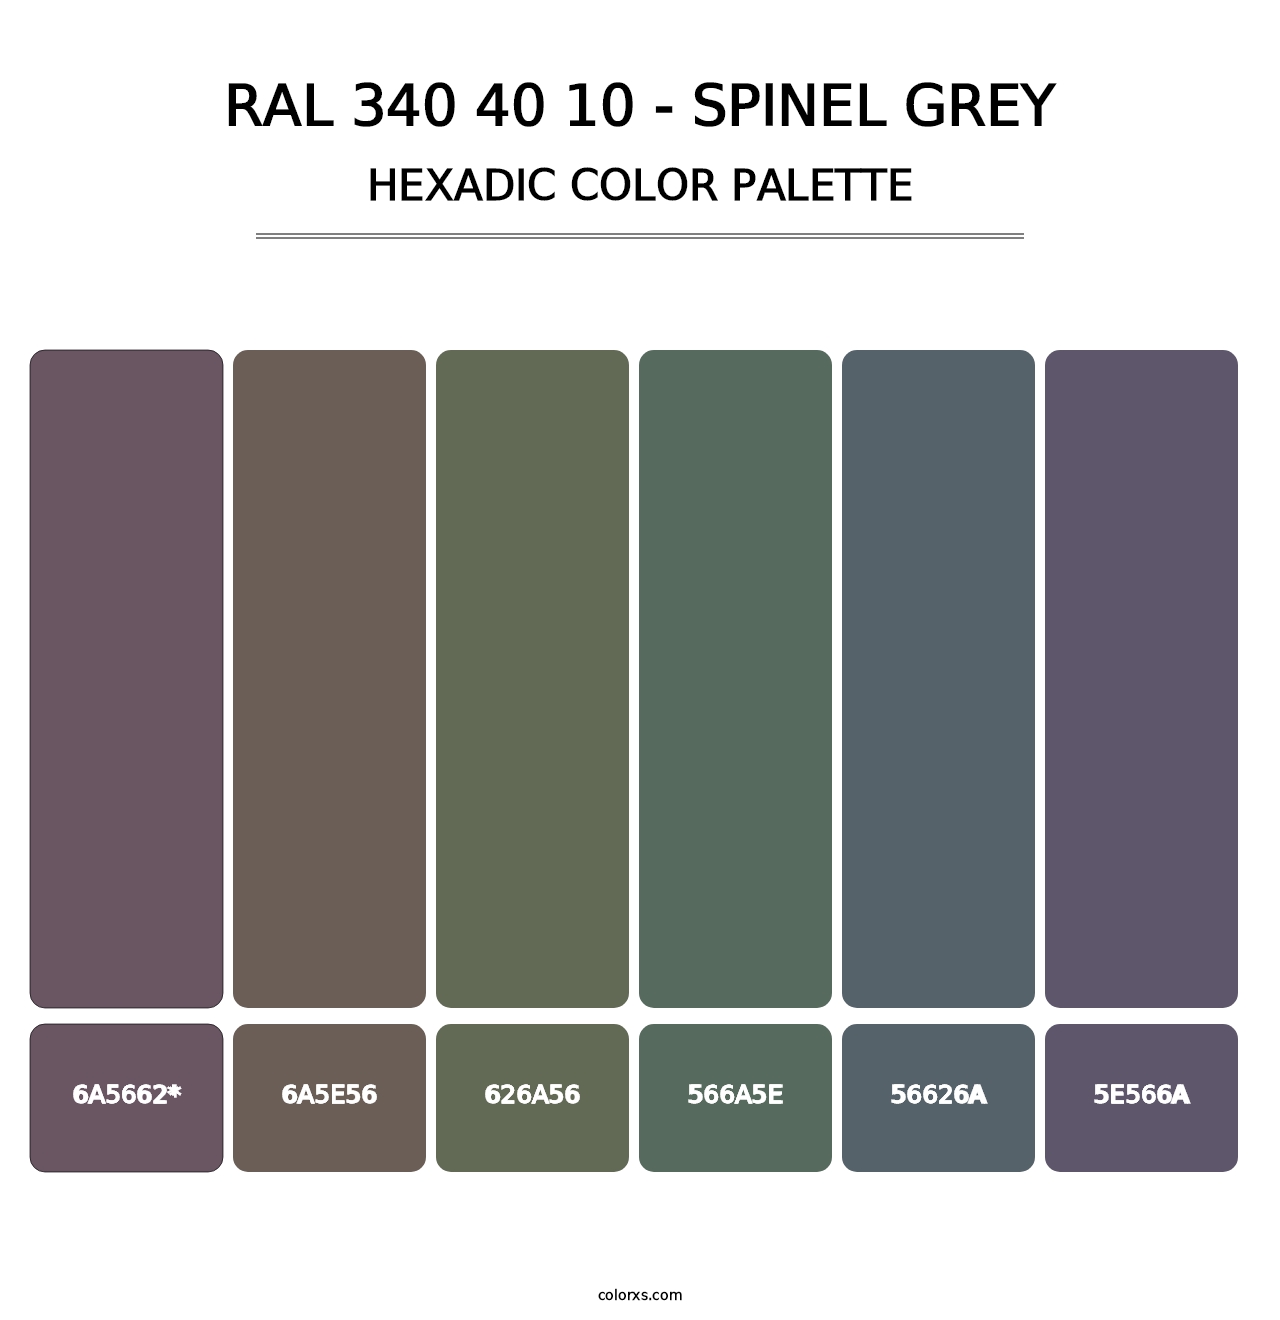 RAL 340 40 10 - Spinel Grey - Hexadic Color Palette